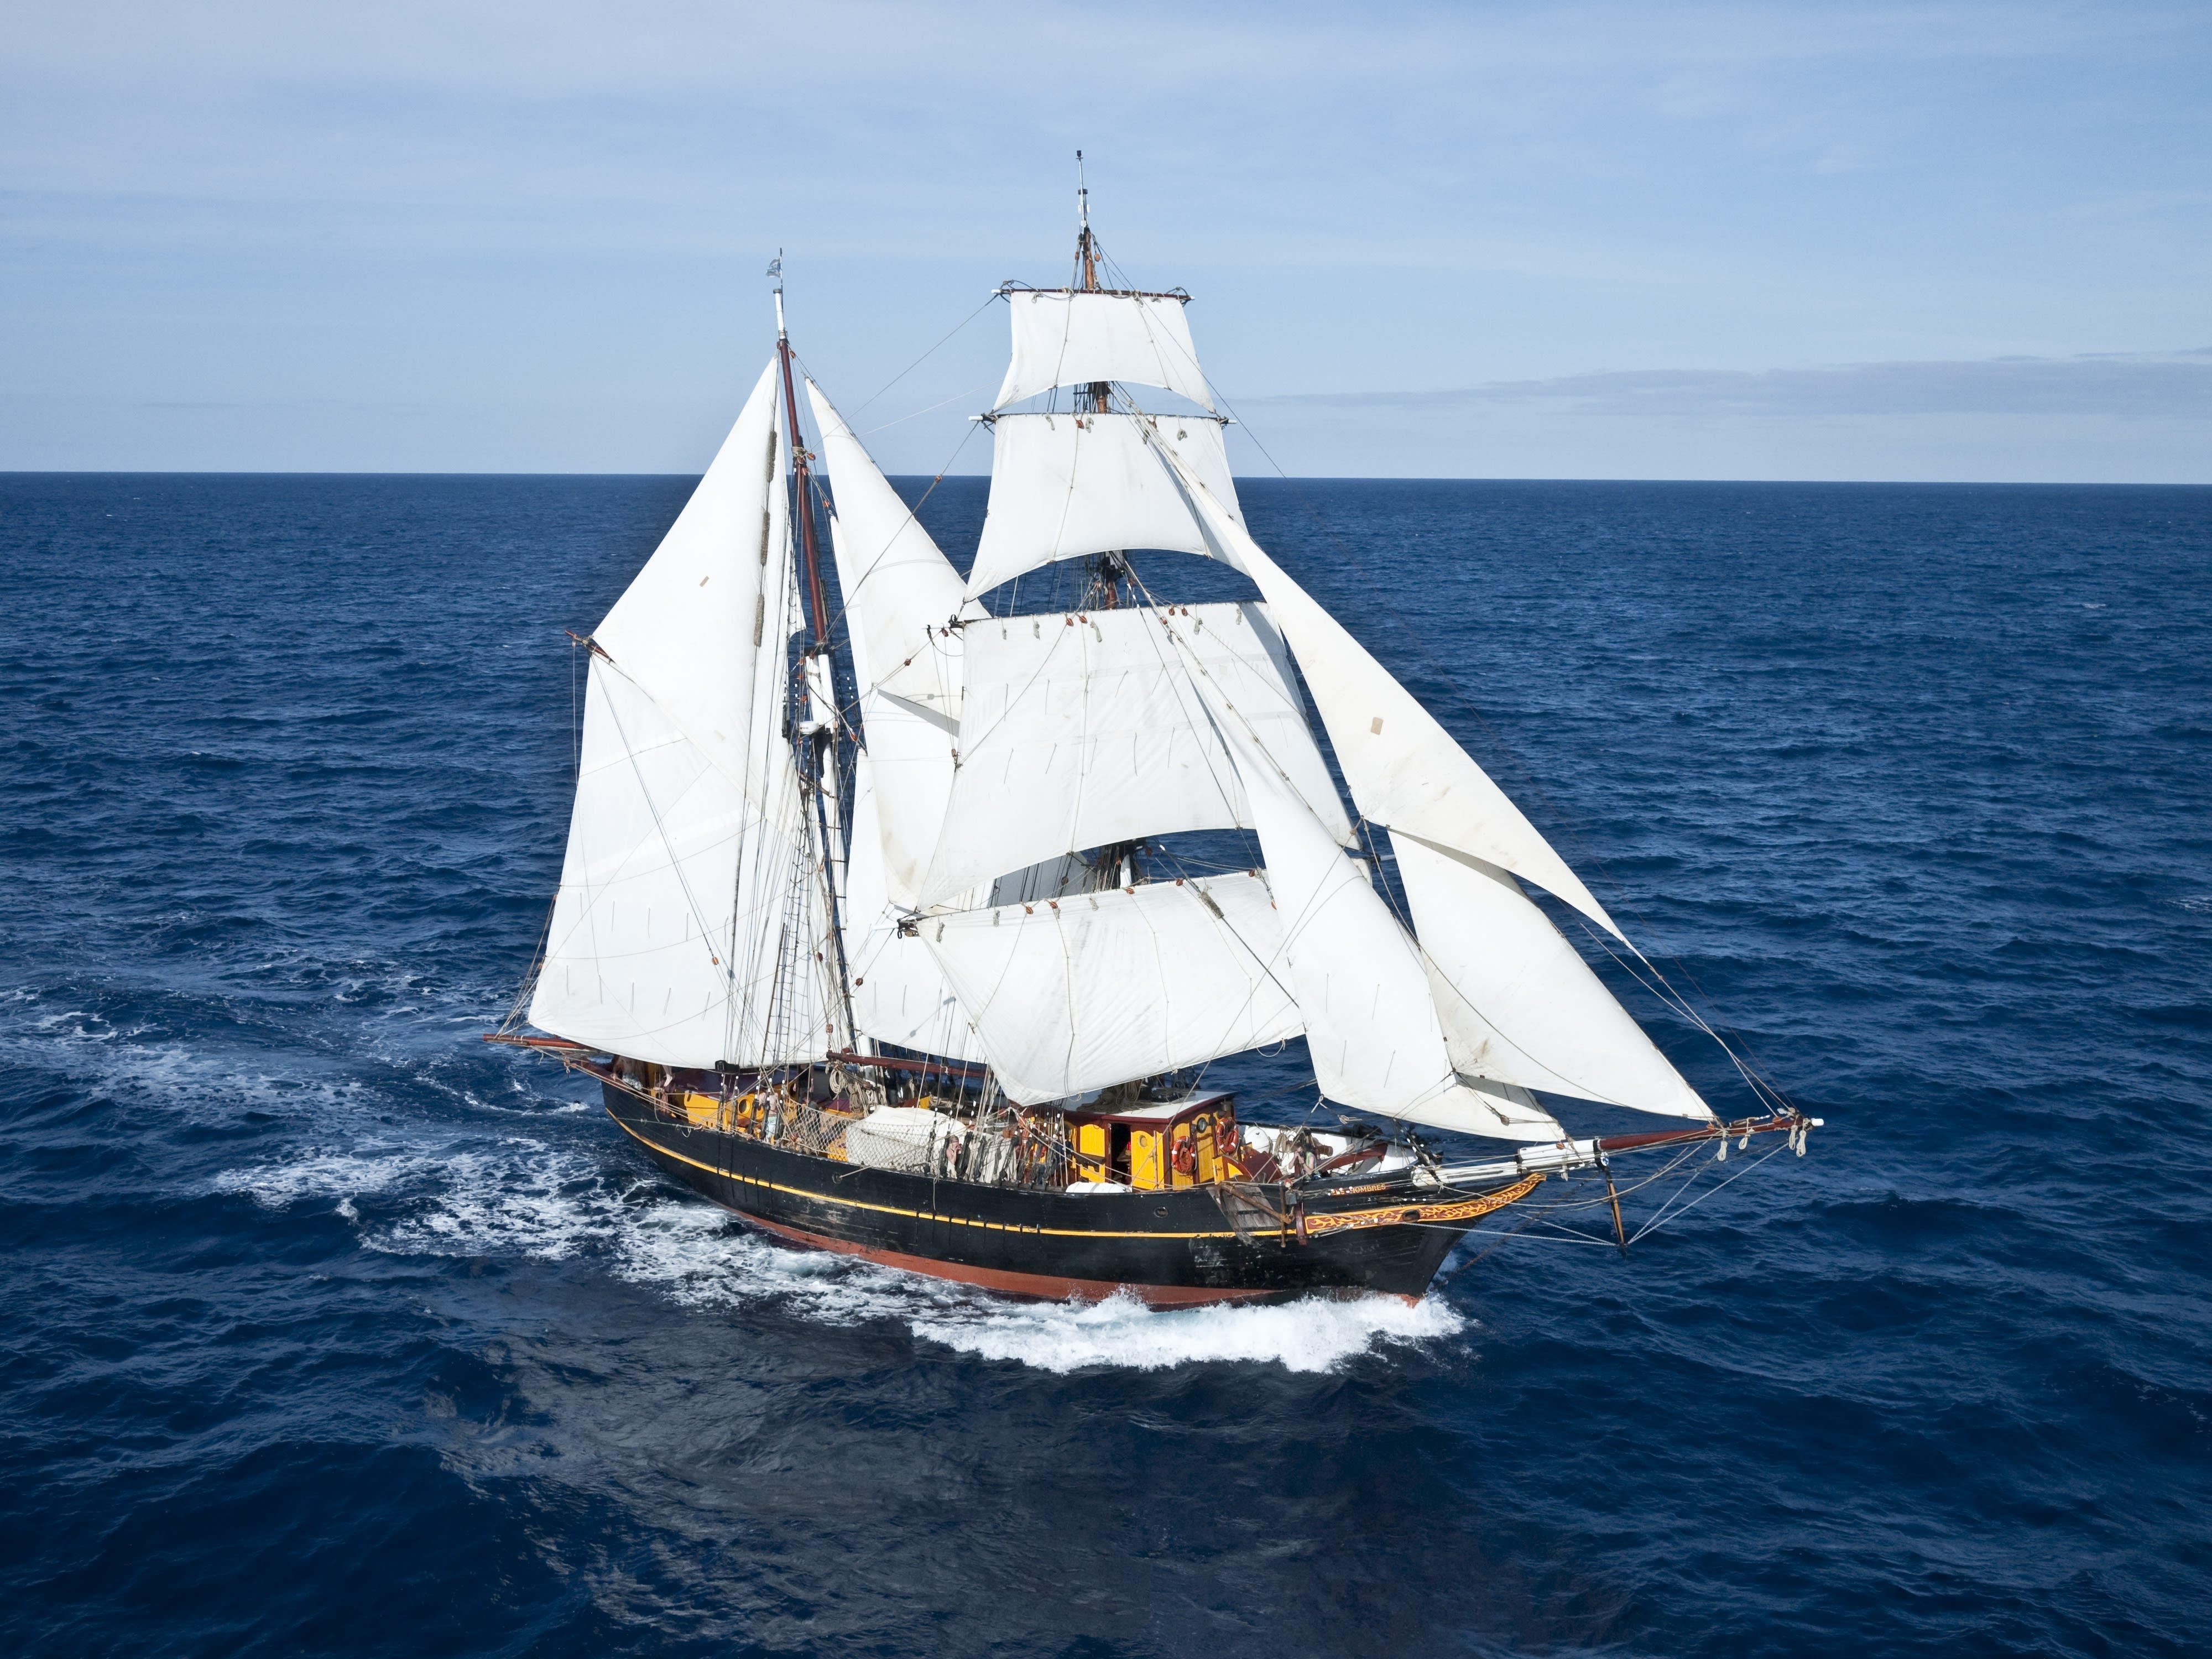 Are traditional sail boats the future of trade?